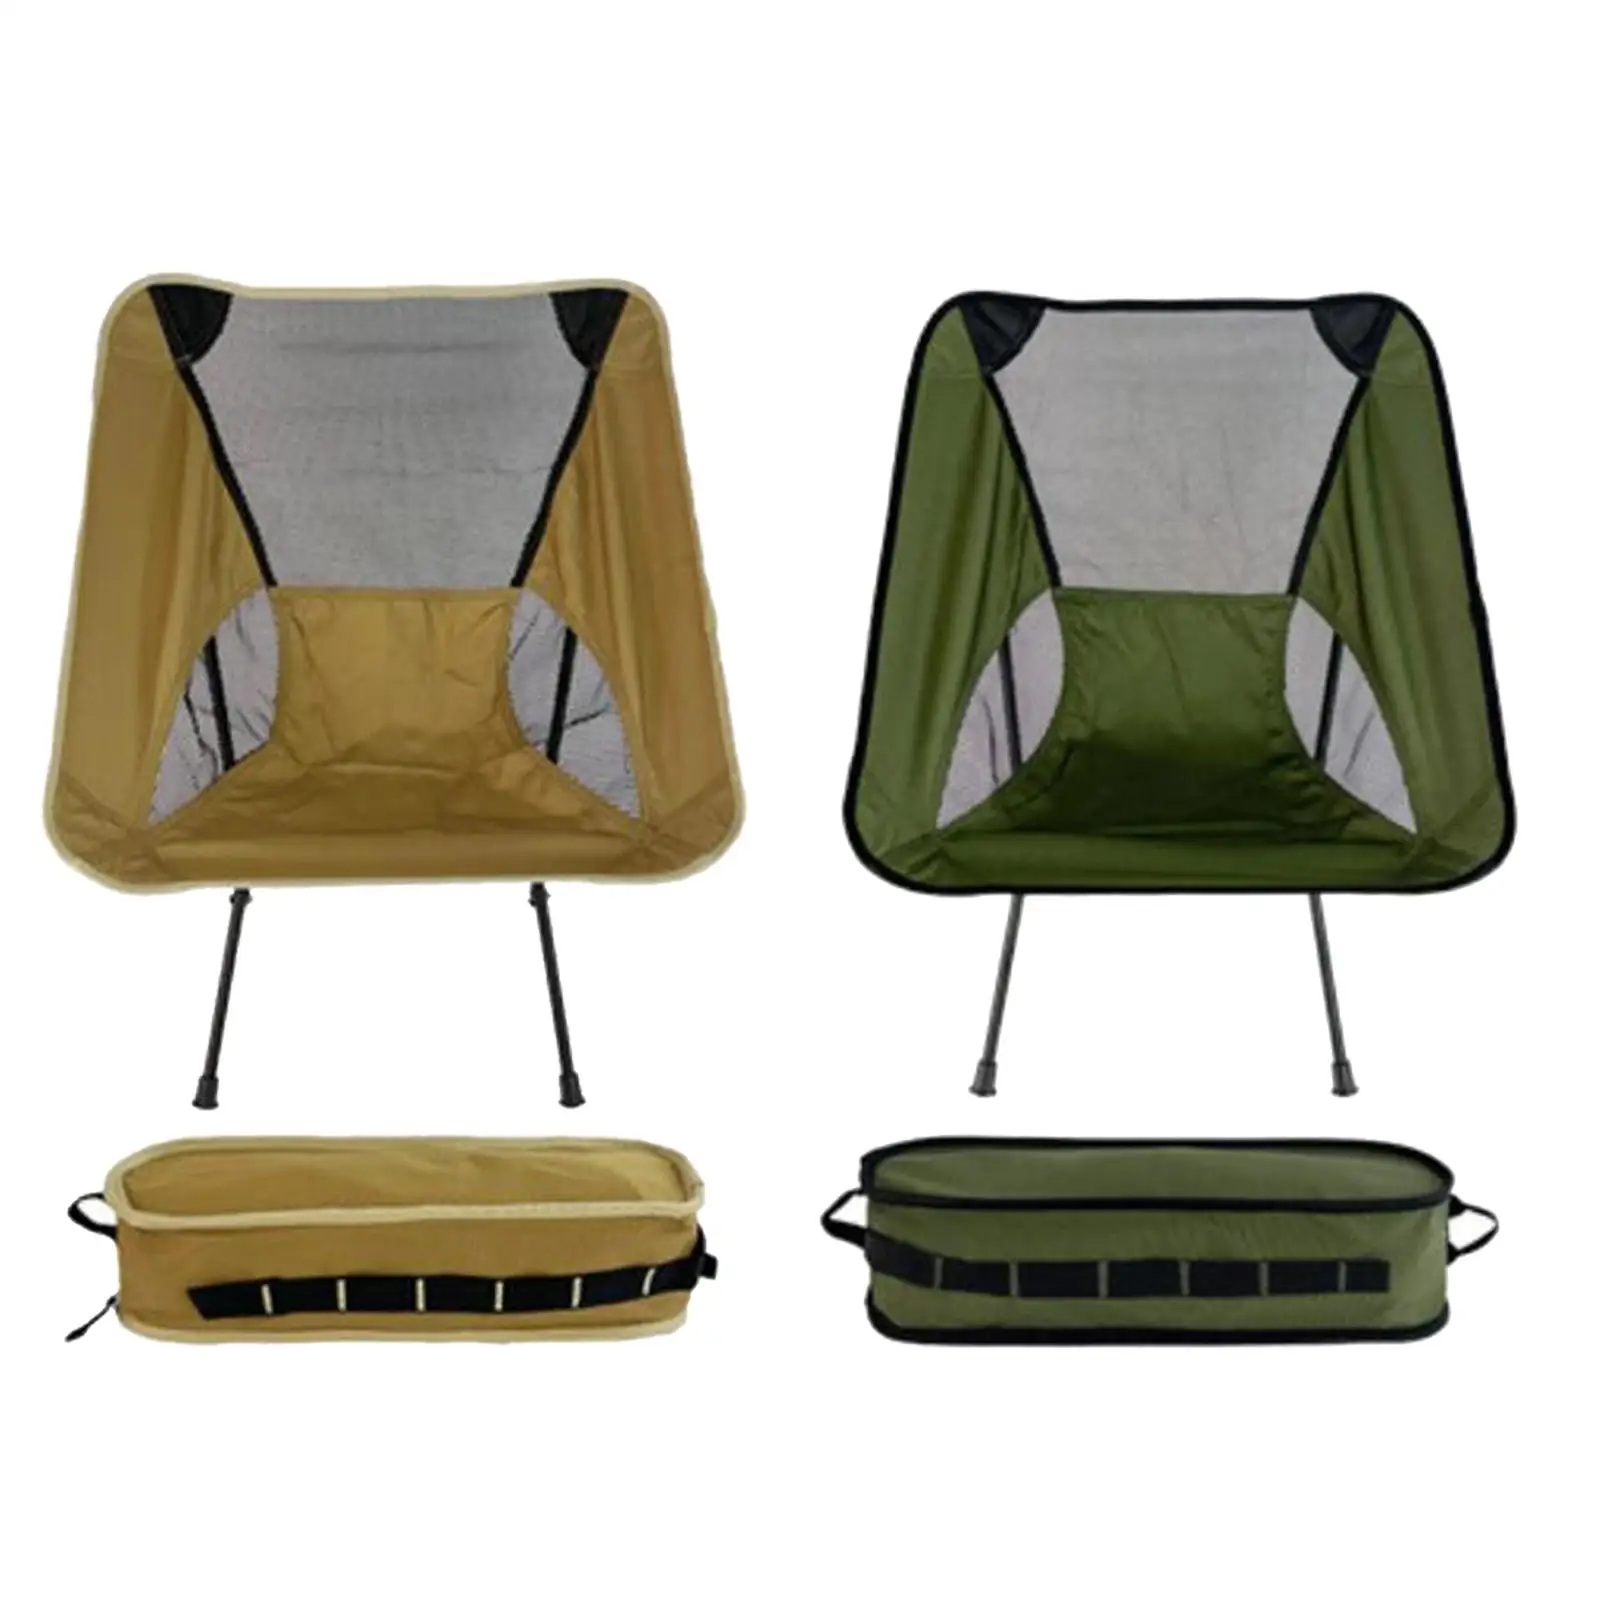 Lightweight Folding Camping Chair Backrest Stool for Picnic Outdoor Fishing